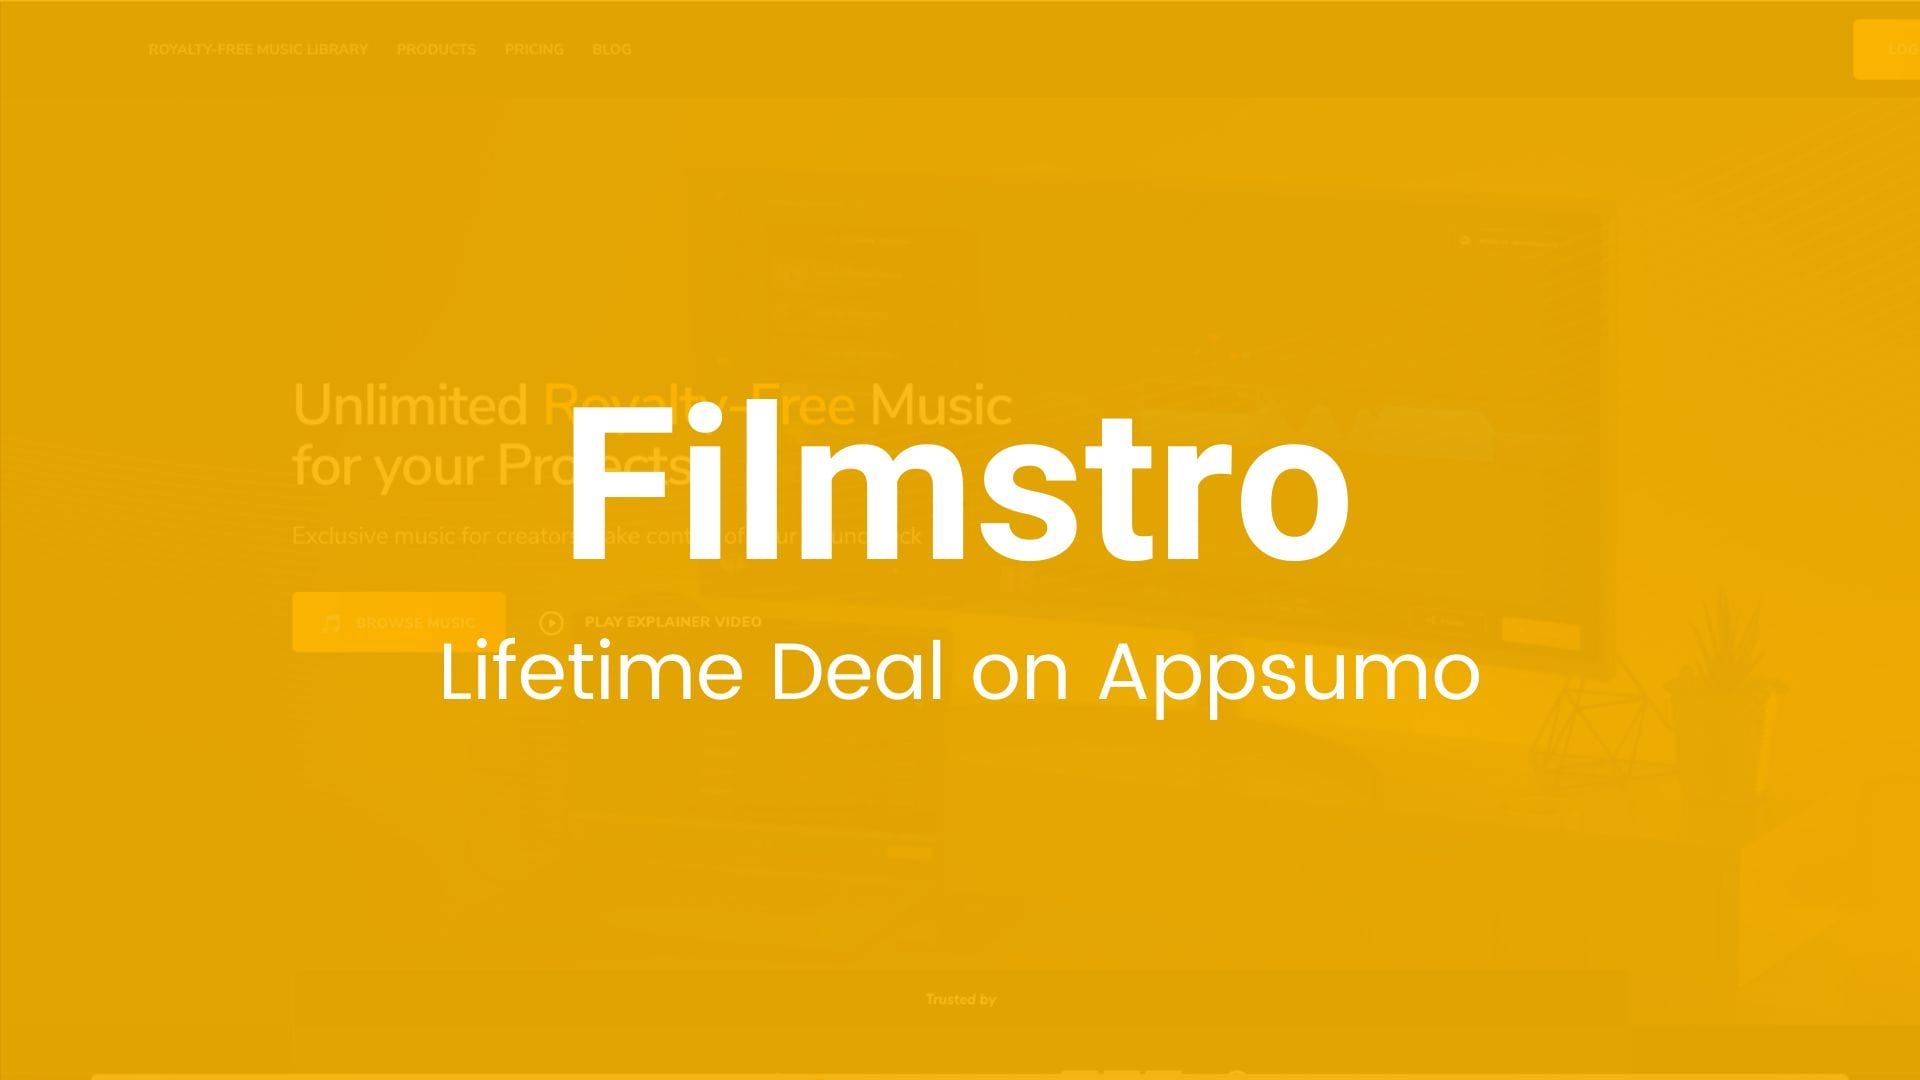 Filmstro: Access Unlimited Royalty-Free Music